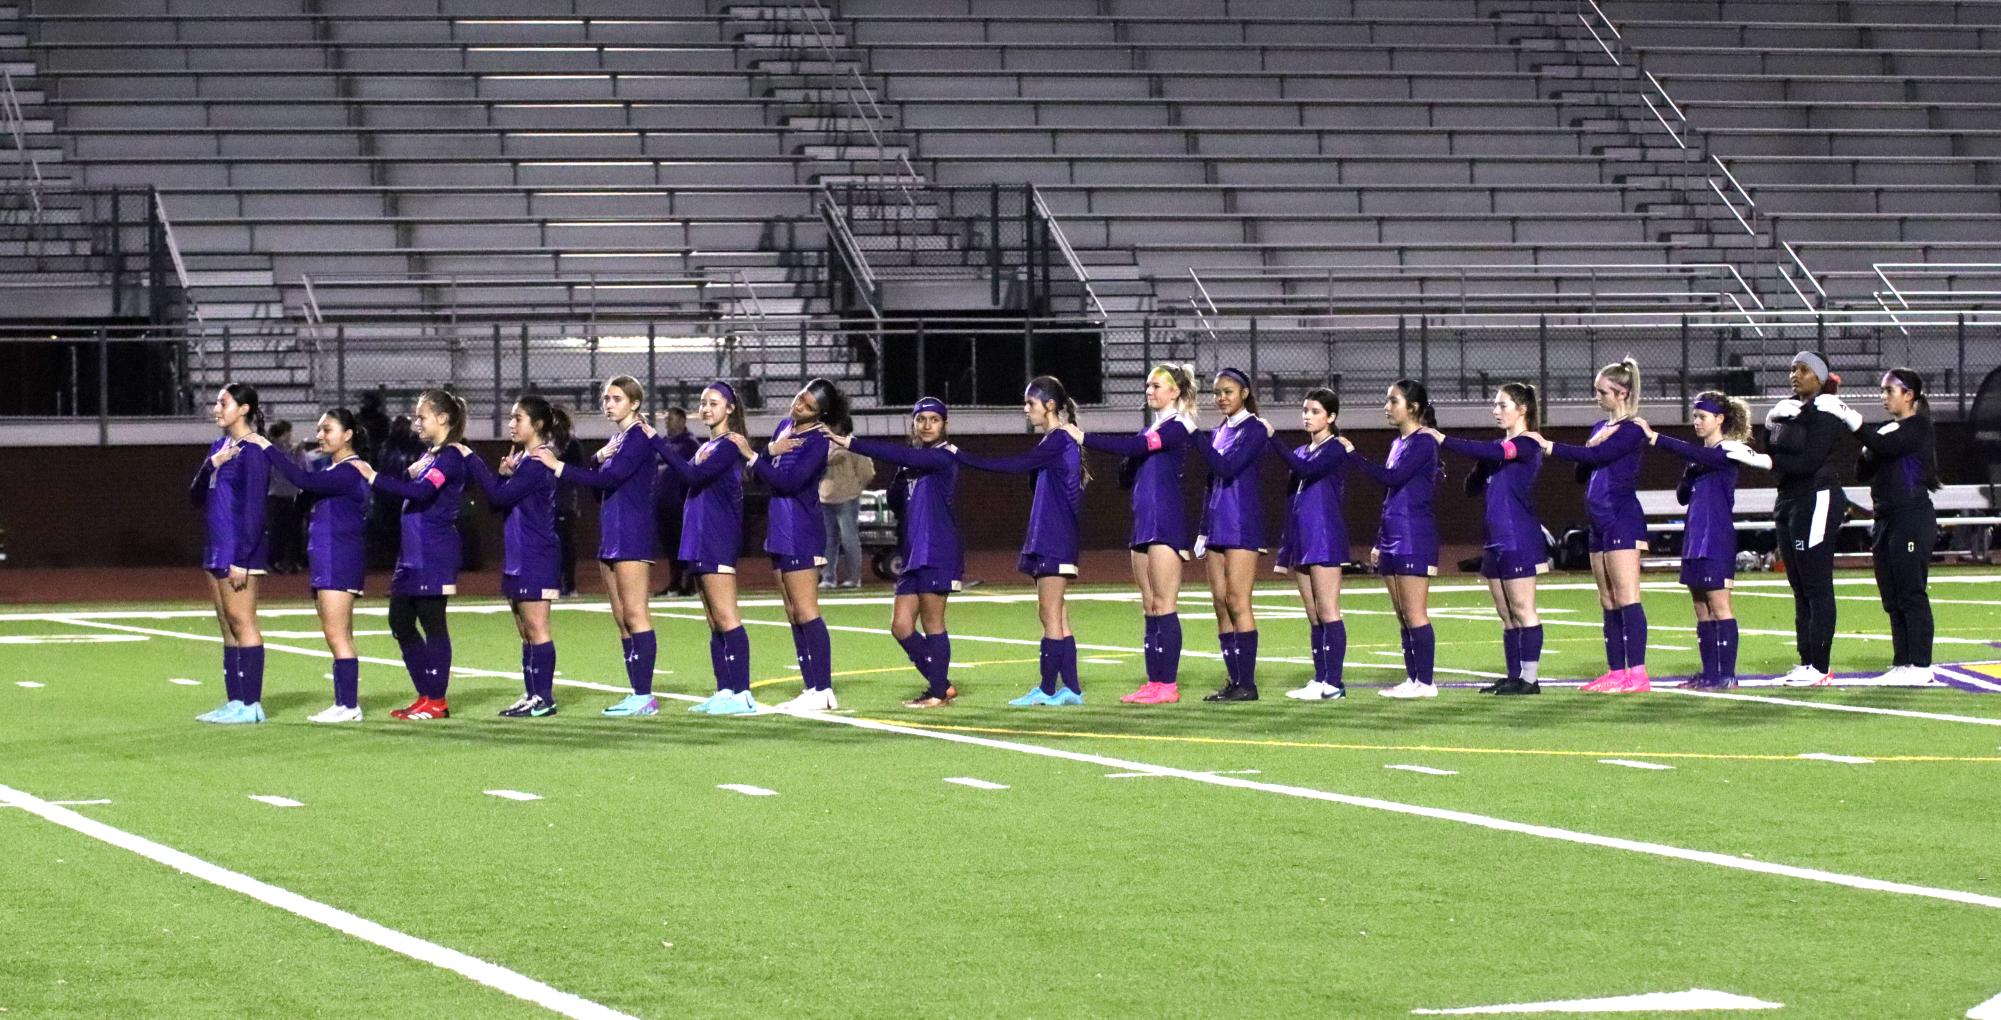 Lady Rangers Soccer Team Boosts Bond With Stronger Connections